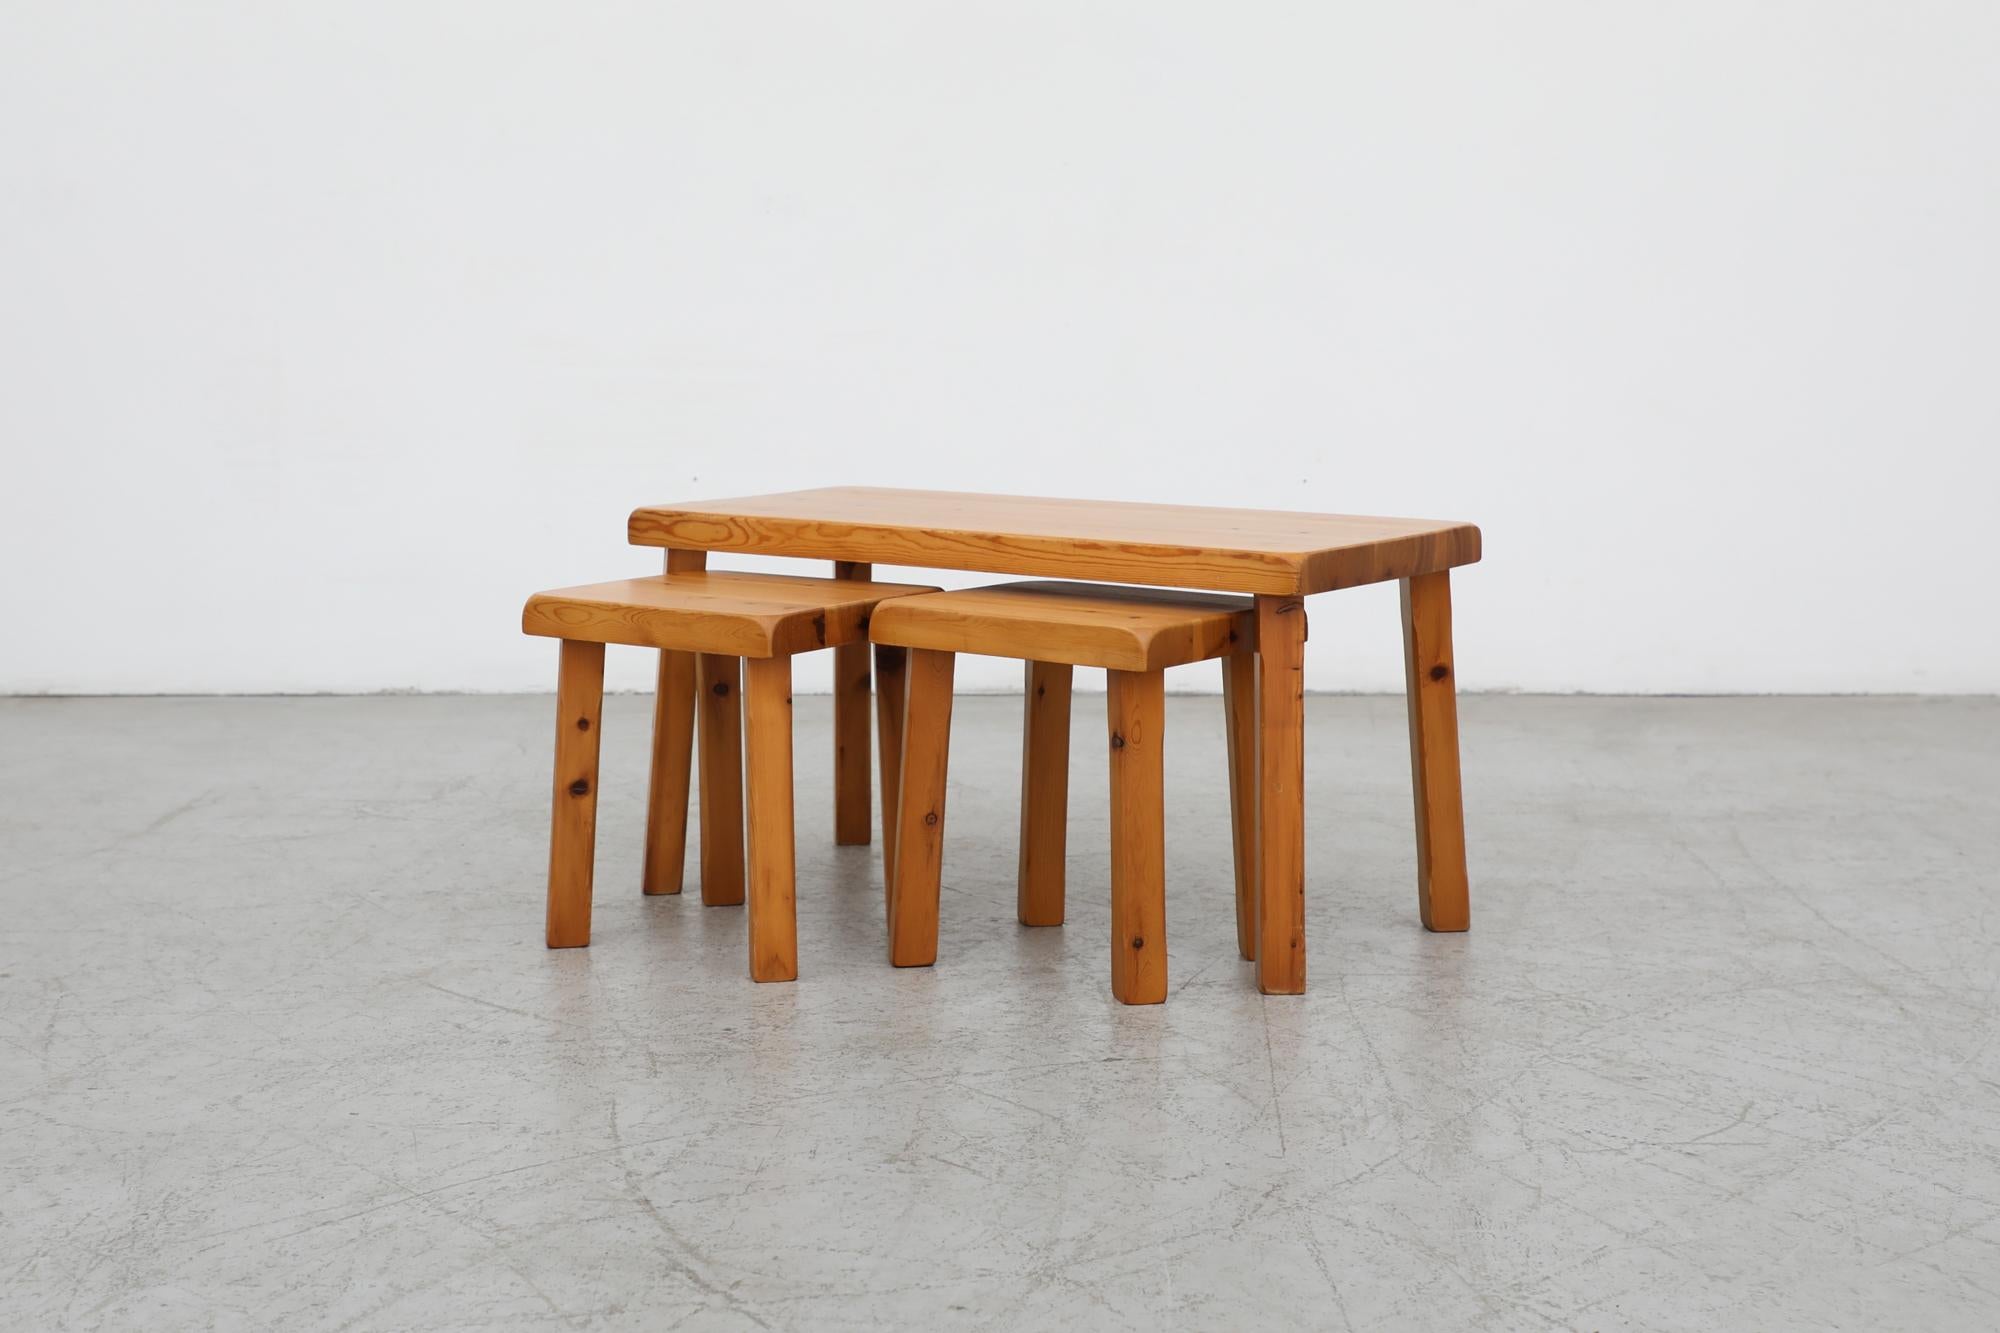 Dutch Set of 3 Pine Charlotte Perriand Style Brutalist Nesting Tables For Sale